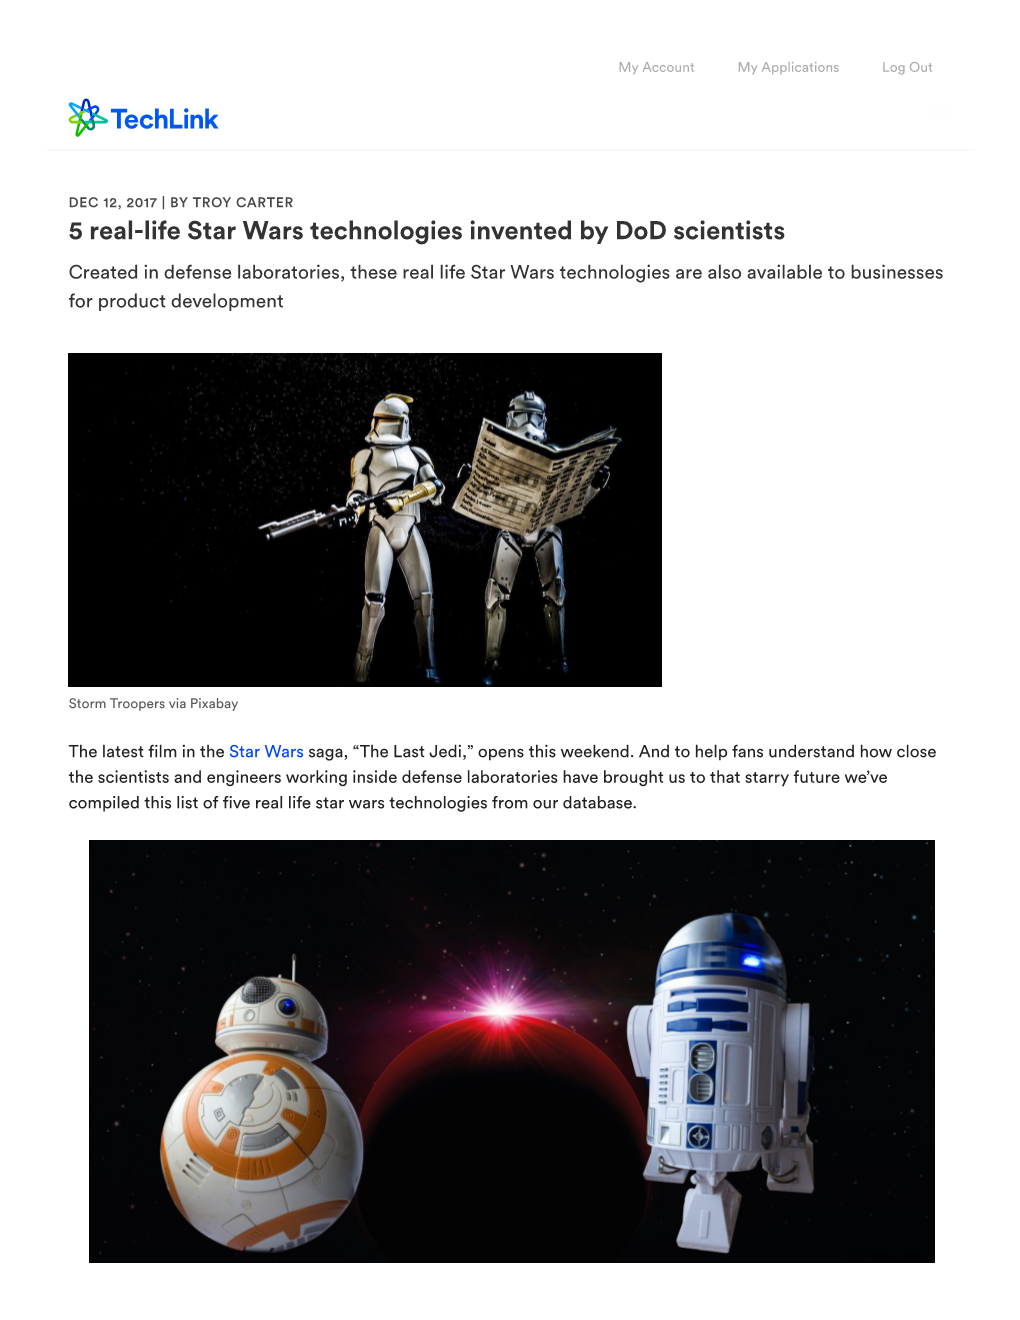 5 Real-Life Star Wars Technologies Invented by Dod Scientists